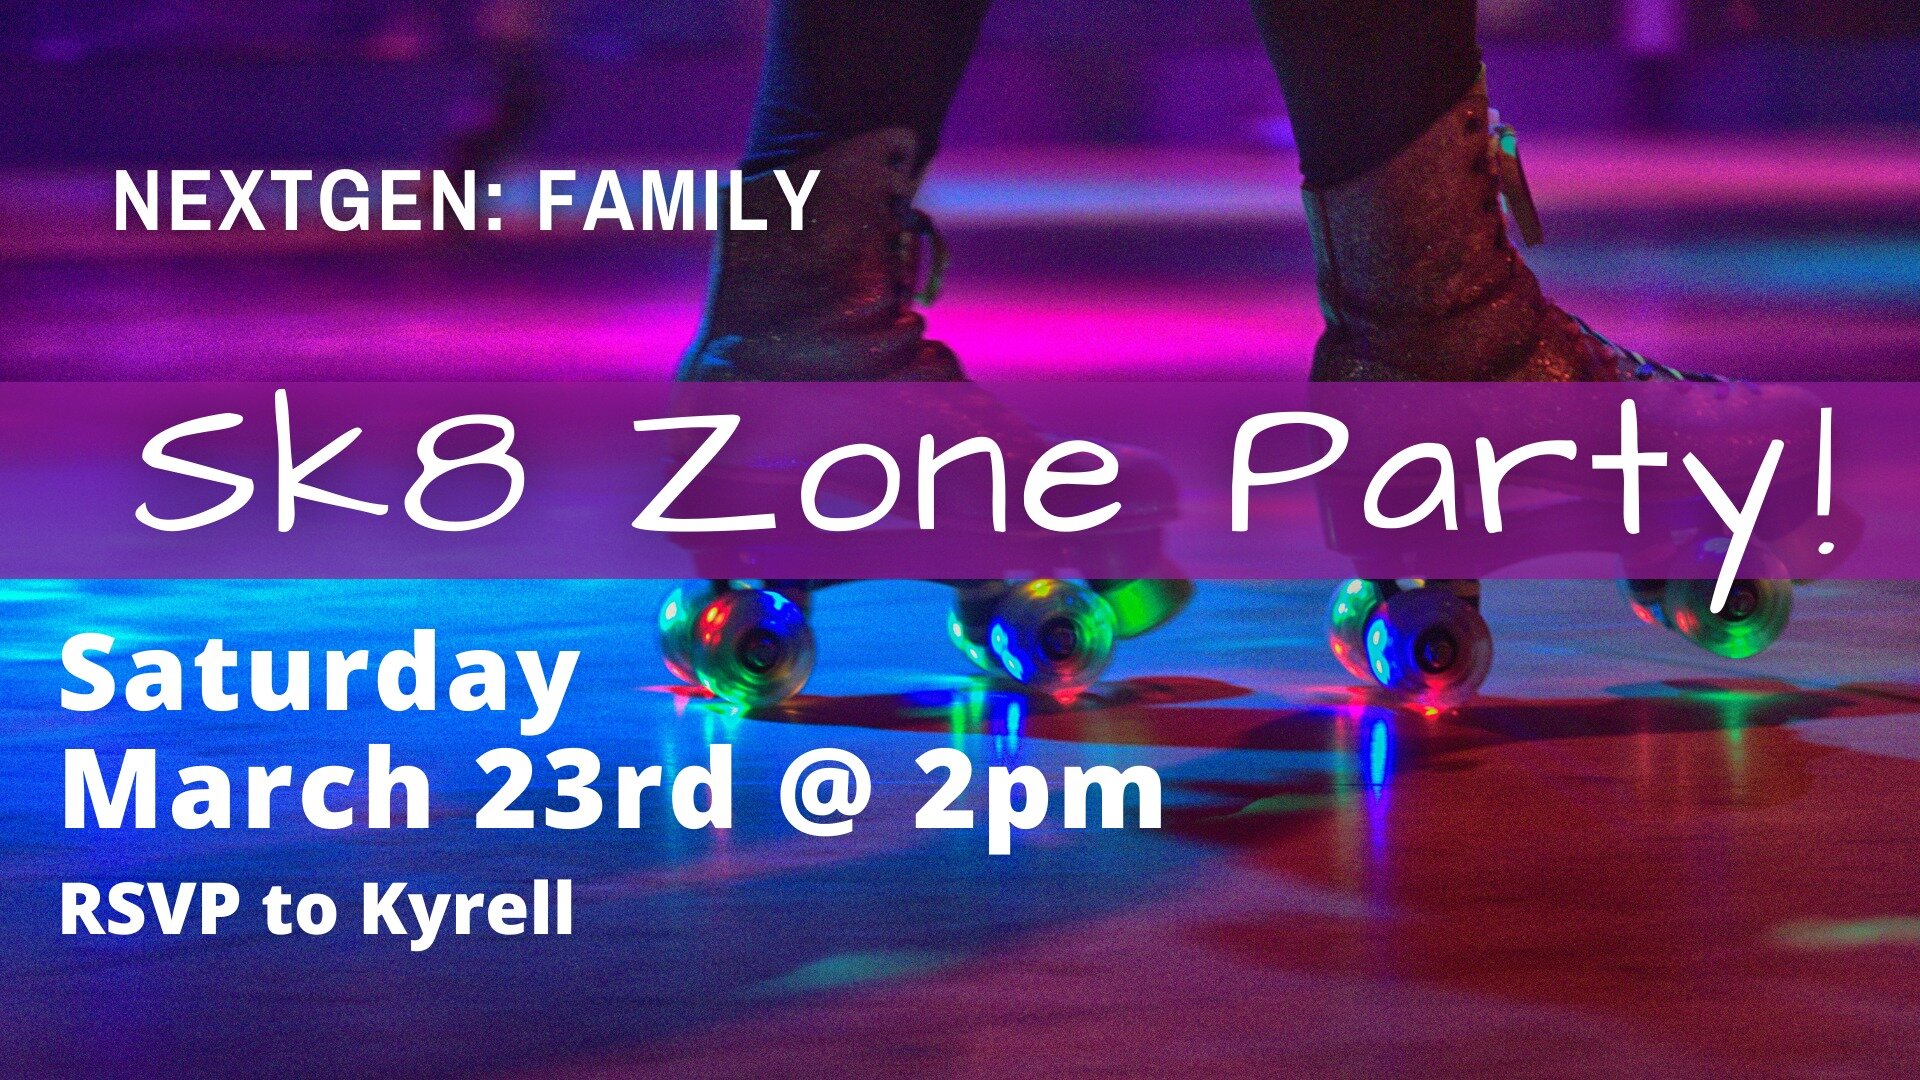 🛼Let's Roll NextGen!

📍Meet us at SK8 Zone from 2pm - 3:30pm on Saturday, March 23rd.
301 Flora Dr. Jefferson City, MO, 65101. 

🎟Admission is covered, but may want to bring a little spending money for snacks or games.

#jcfumc #nextgen #sk8zonepa